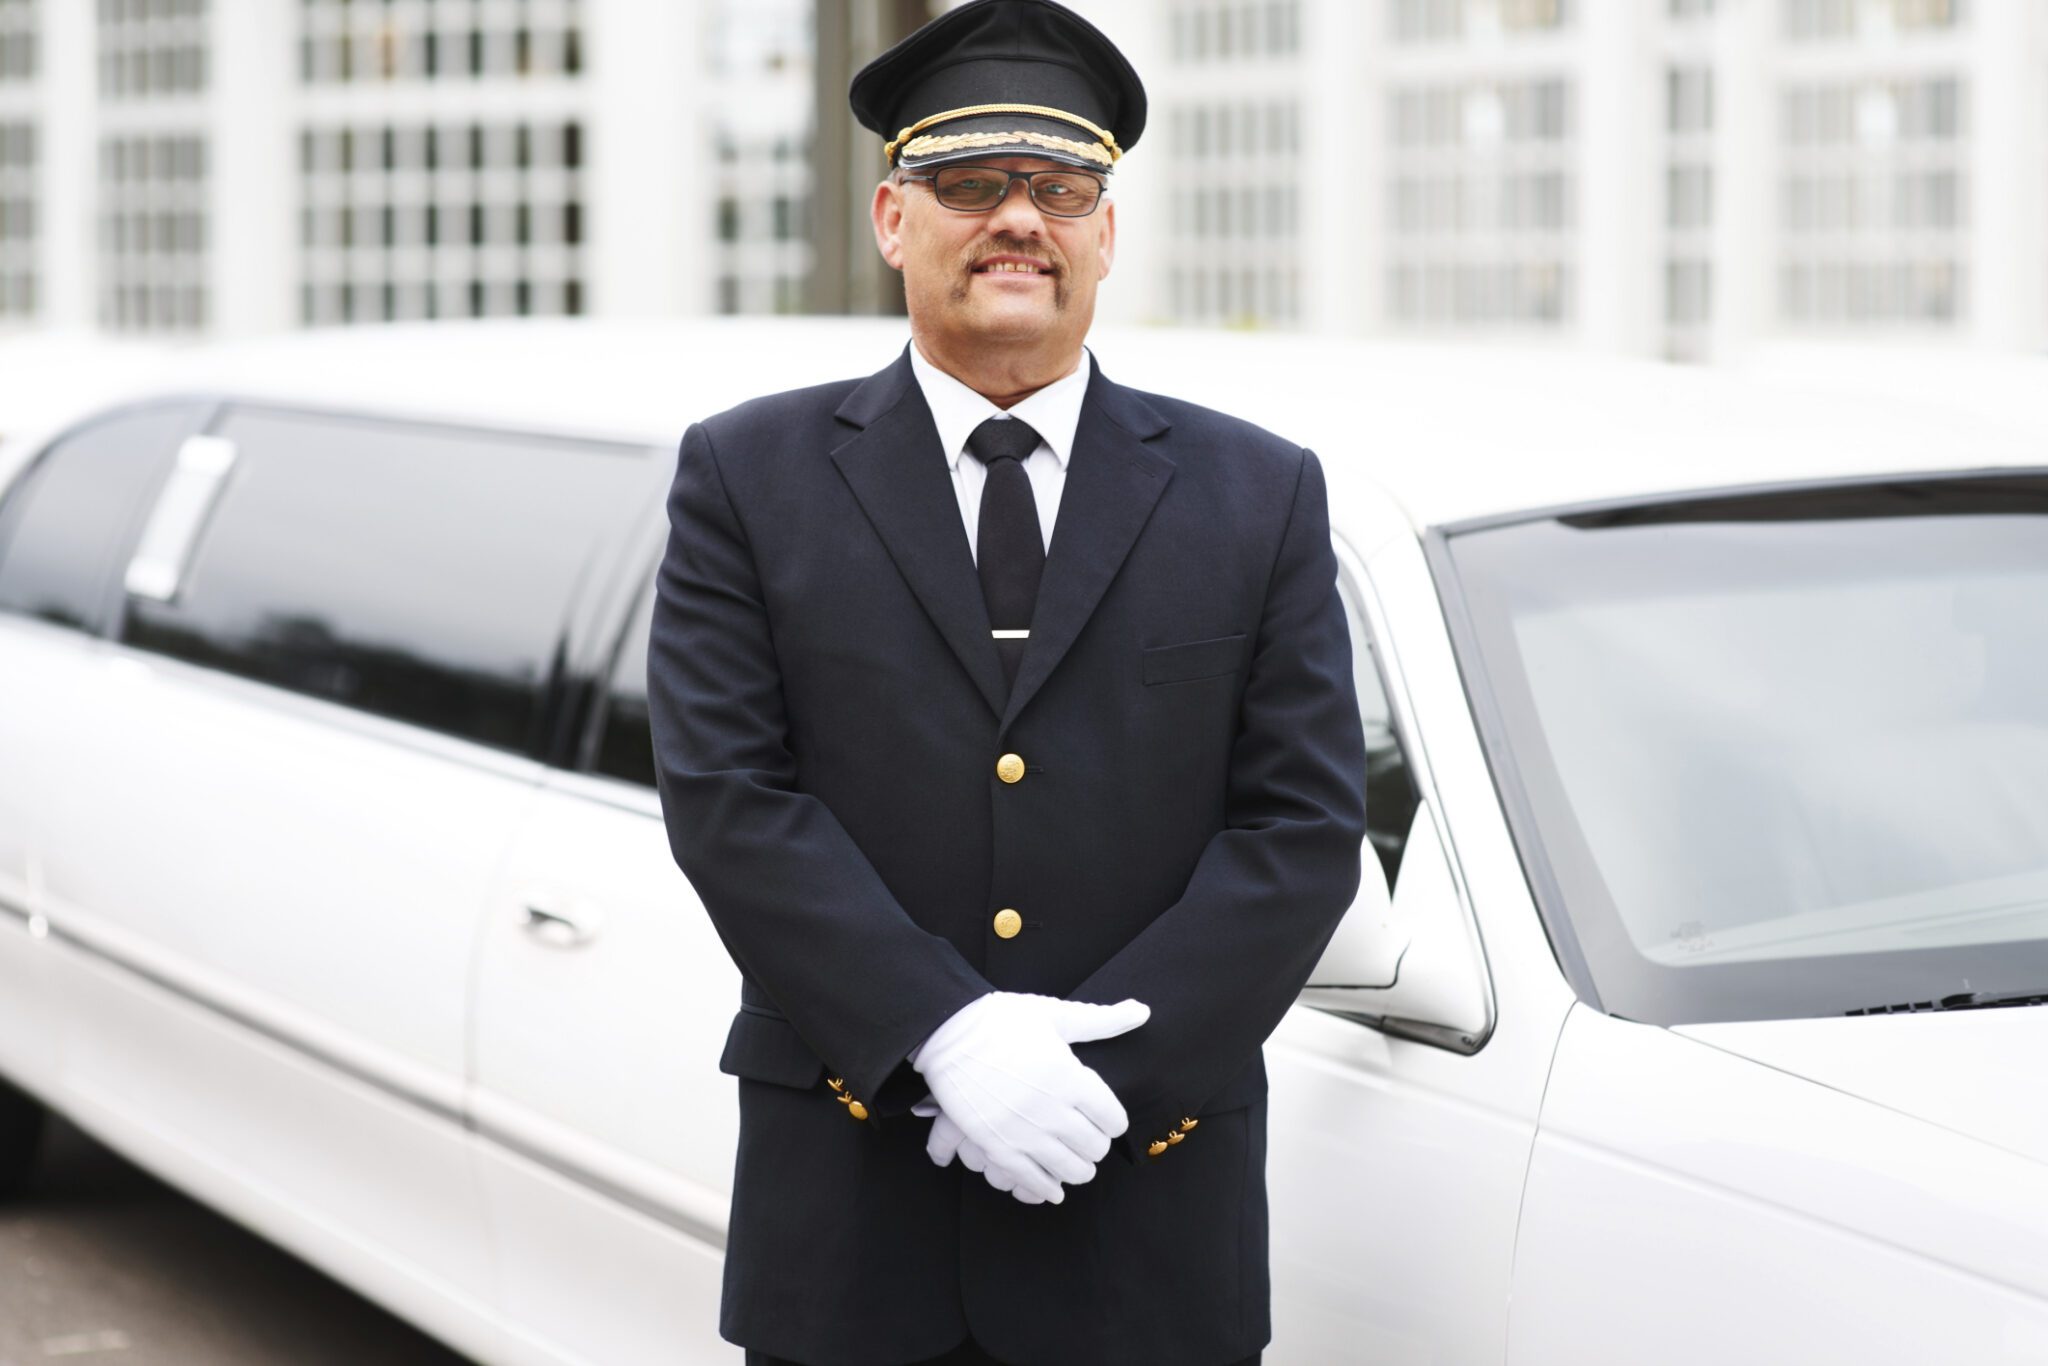 What Type of Commercial Auto Insurance Do Chauffeurs Need? Miller's